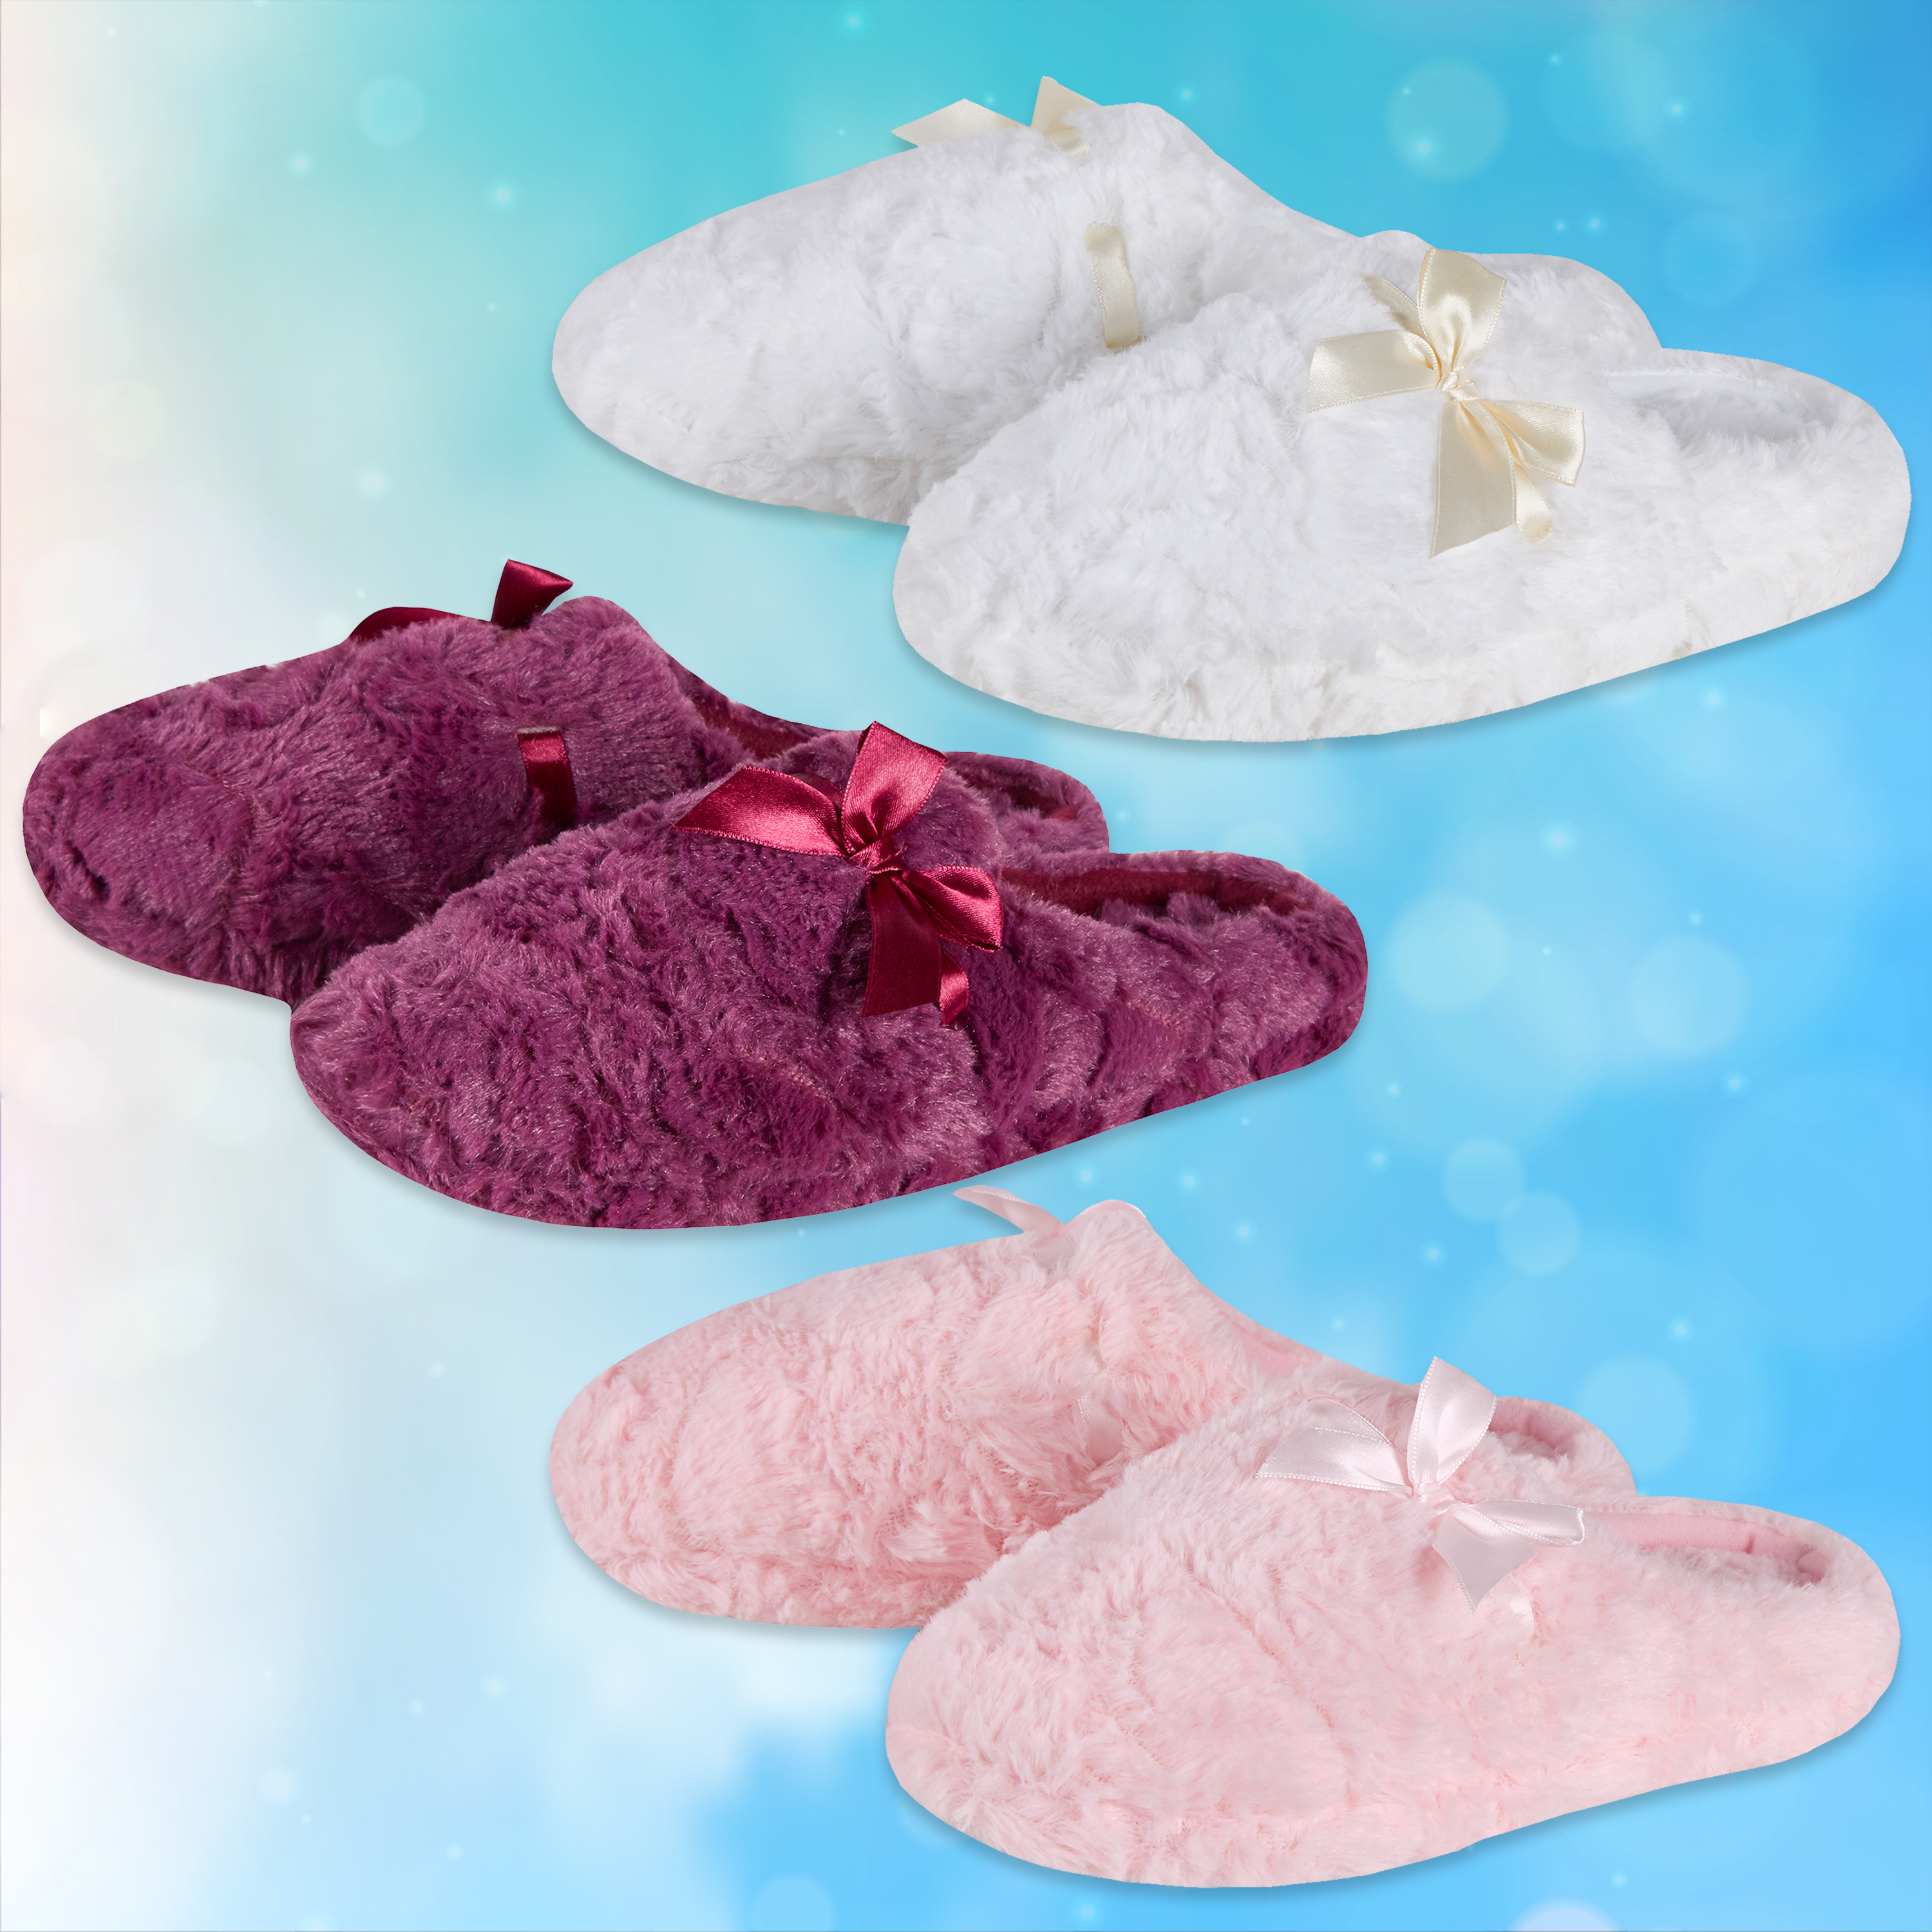 pink fluffy house shoes